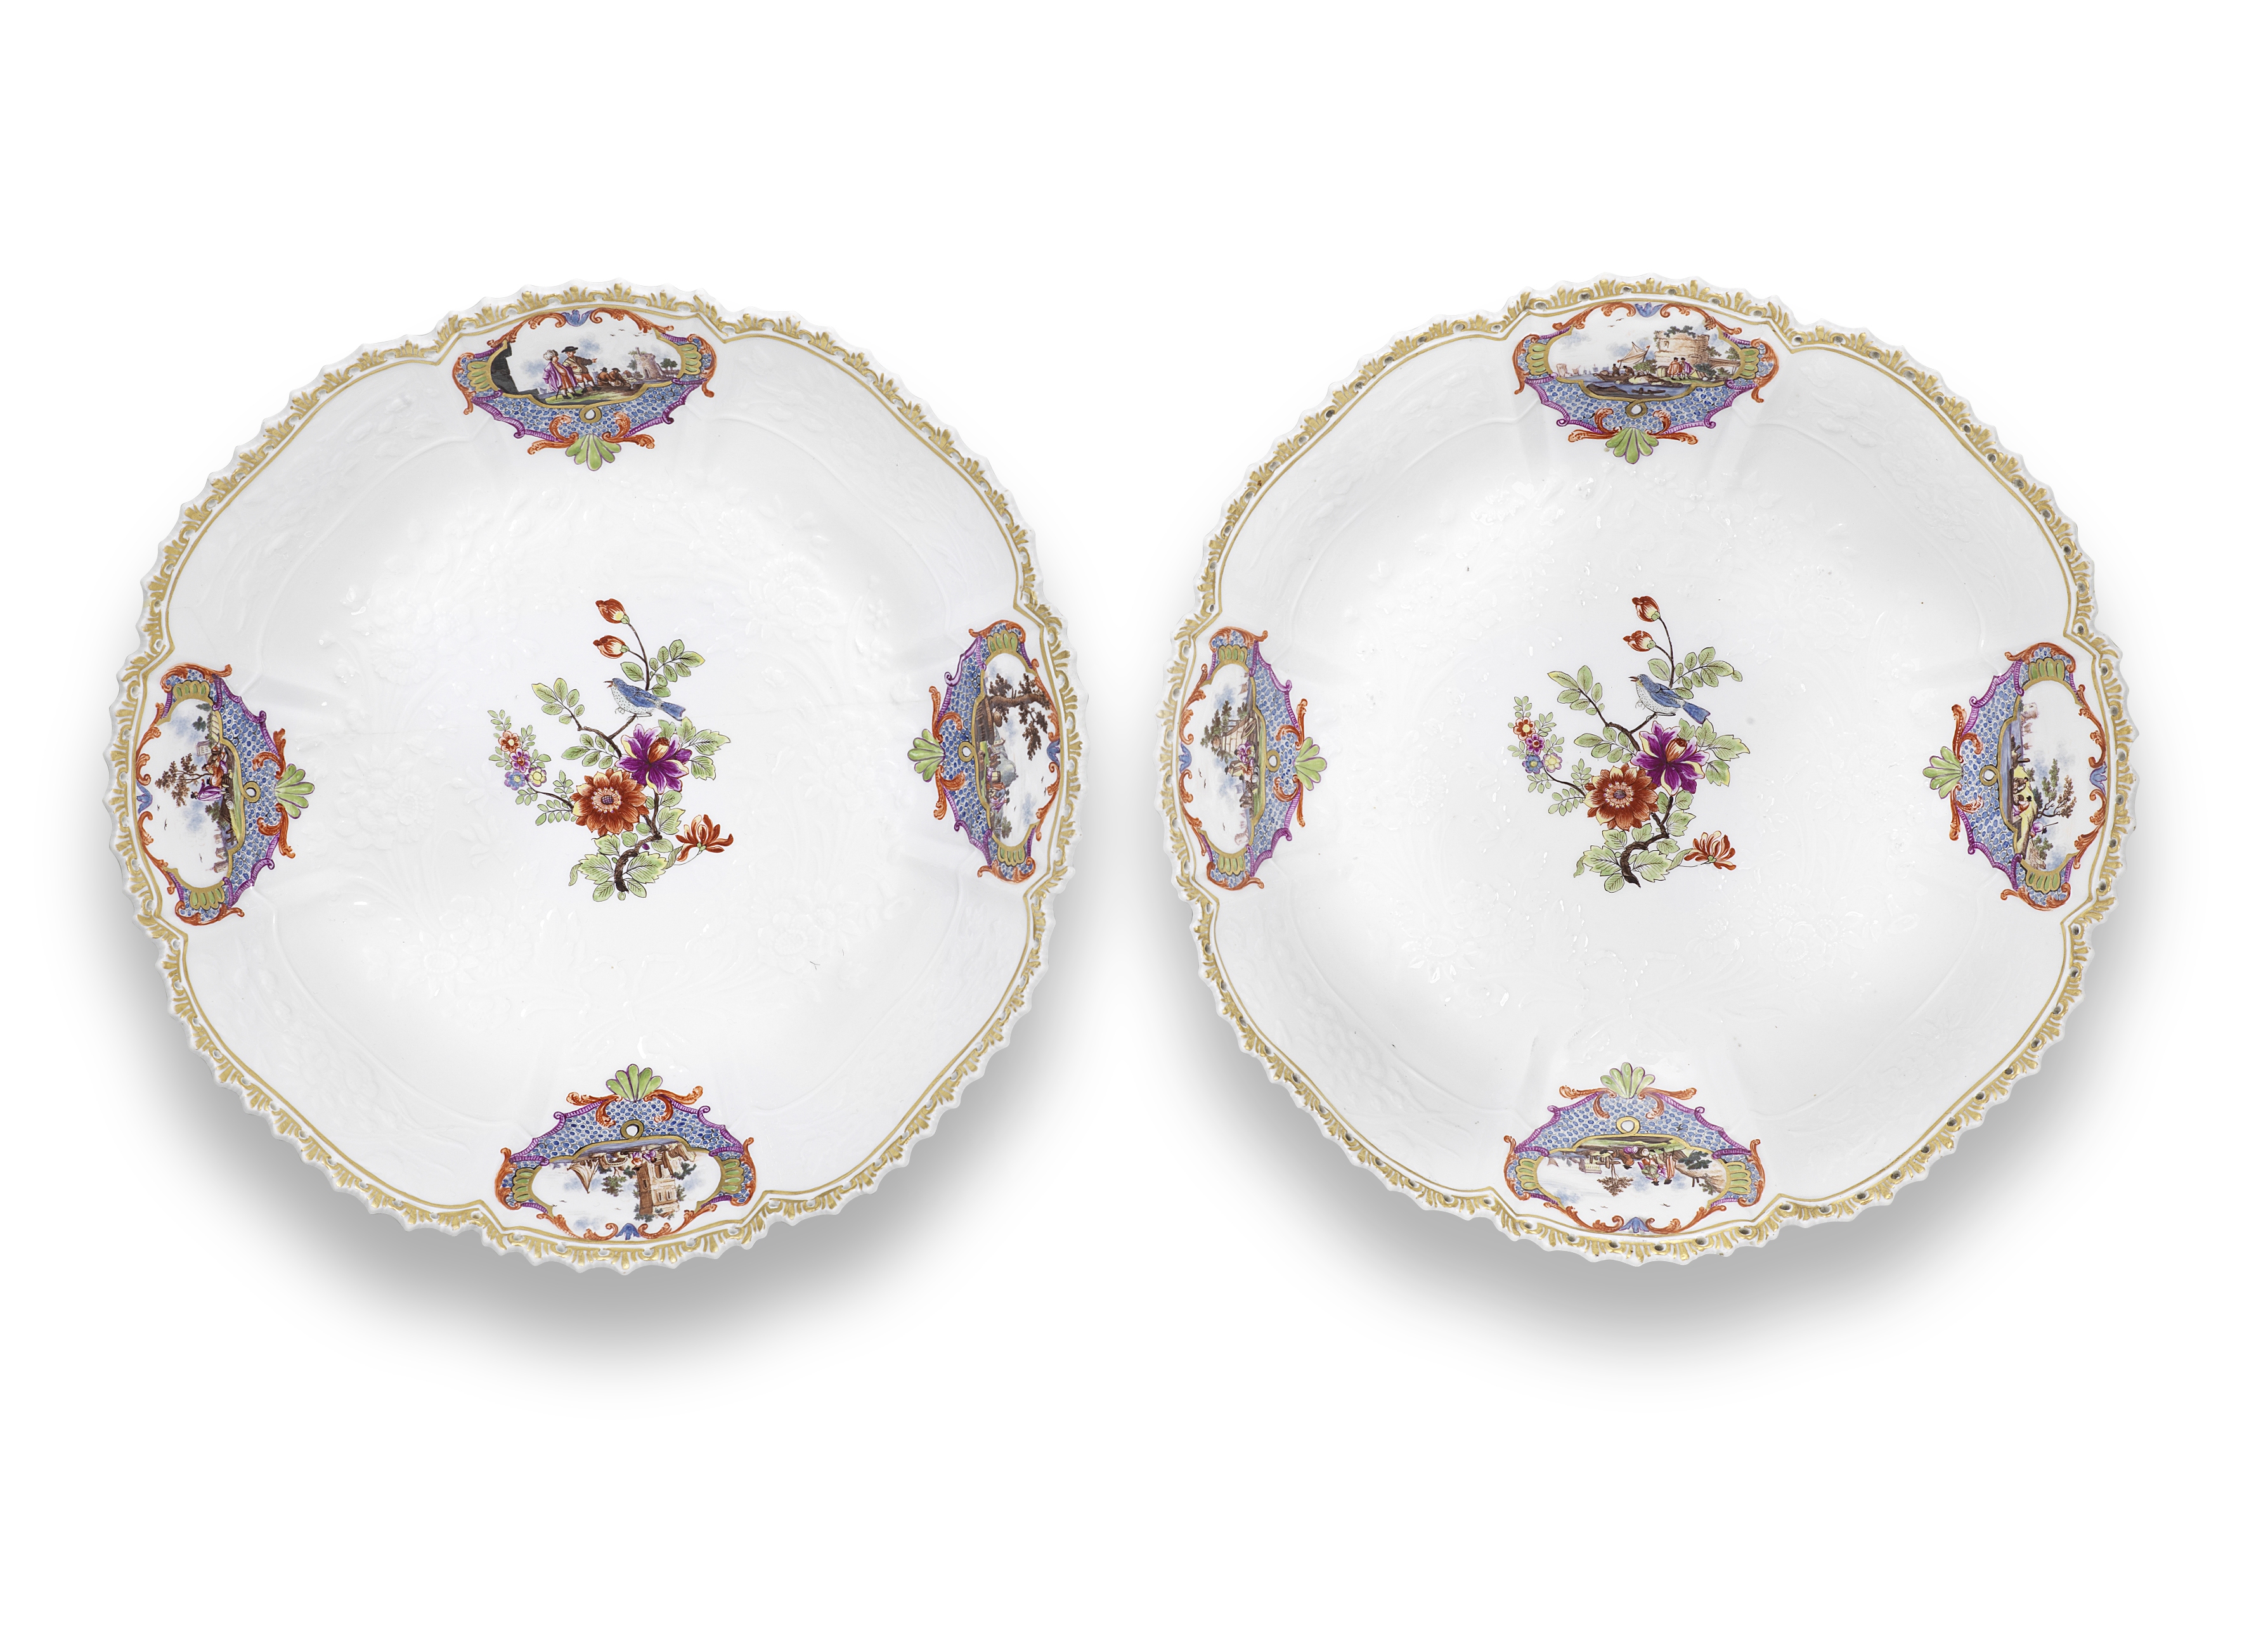 A pair of Meissen deep dishes from the Empress Elisabeth service, circa 1741